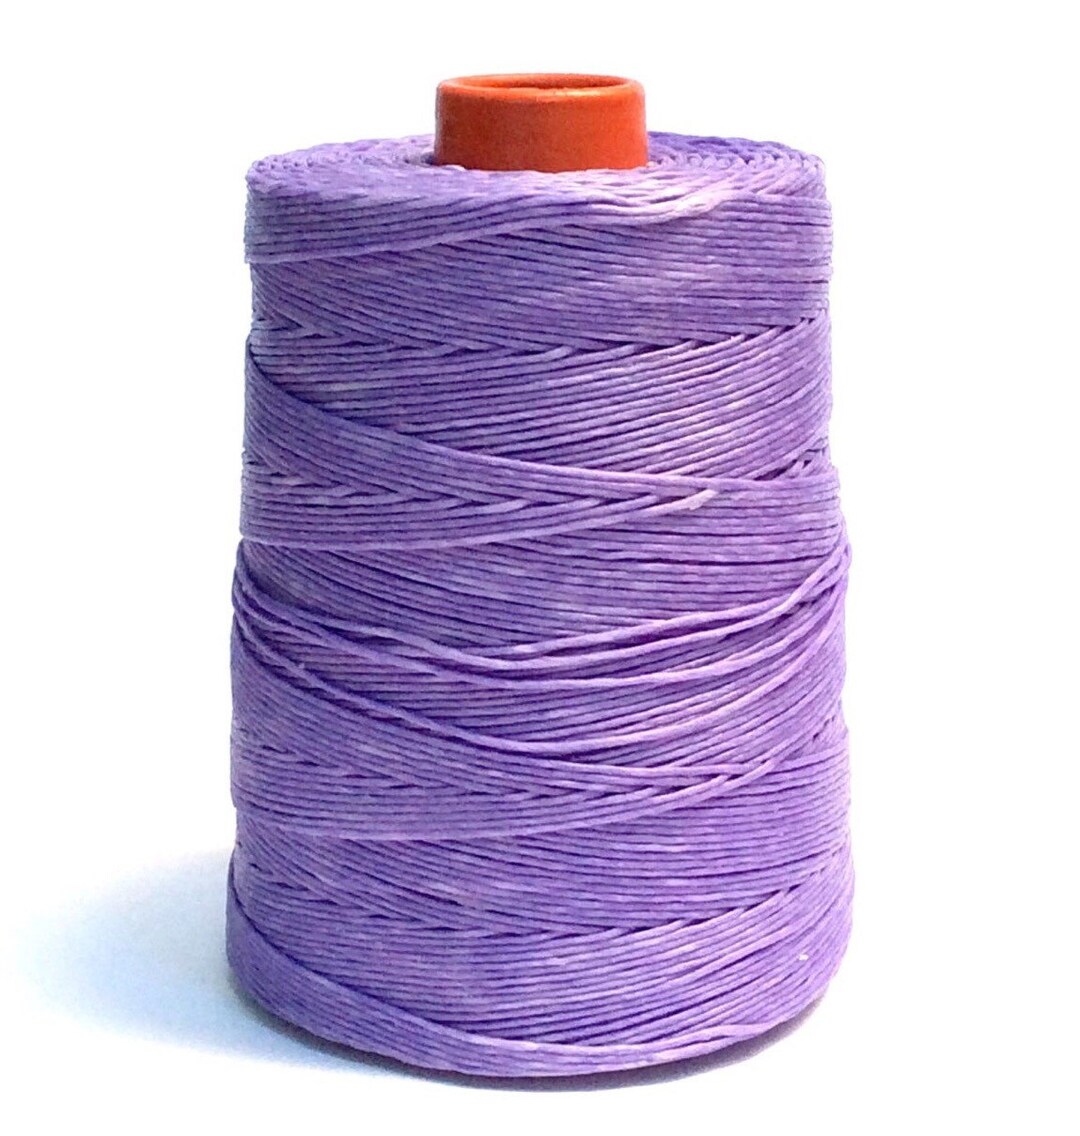 Light Purple Waxed Cord Lavender Colour Cotton Waxed Cord - Etsy UK